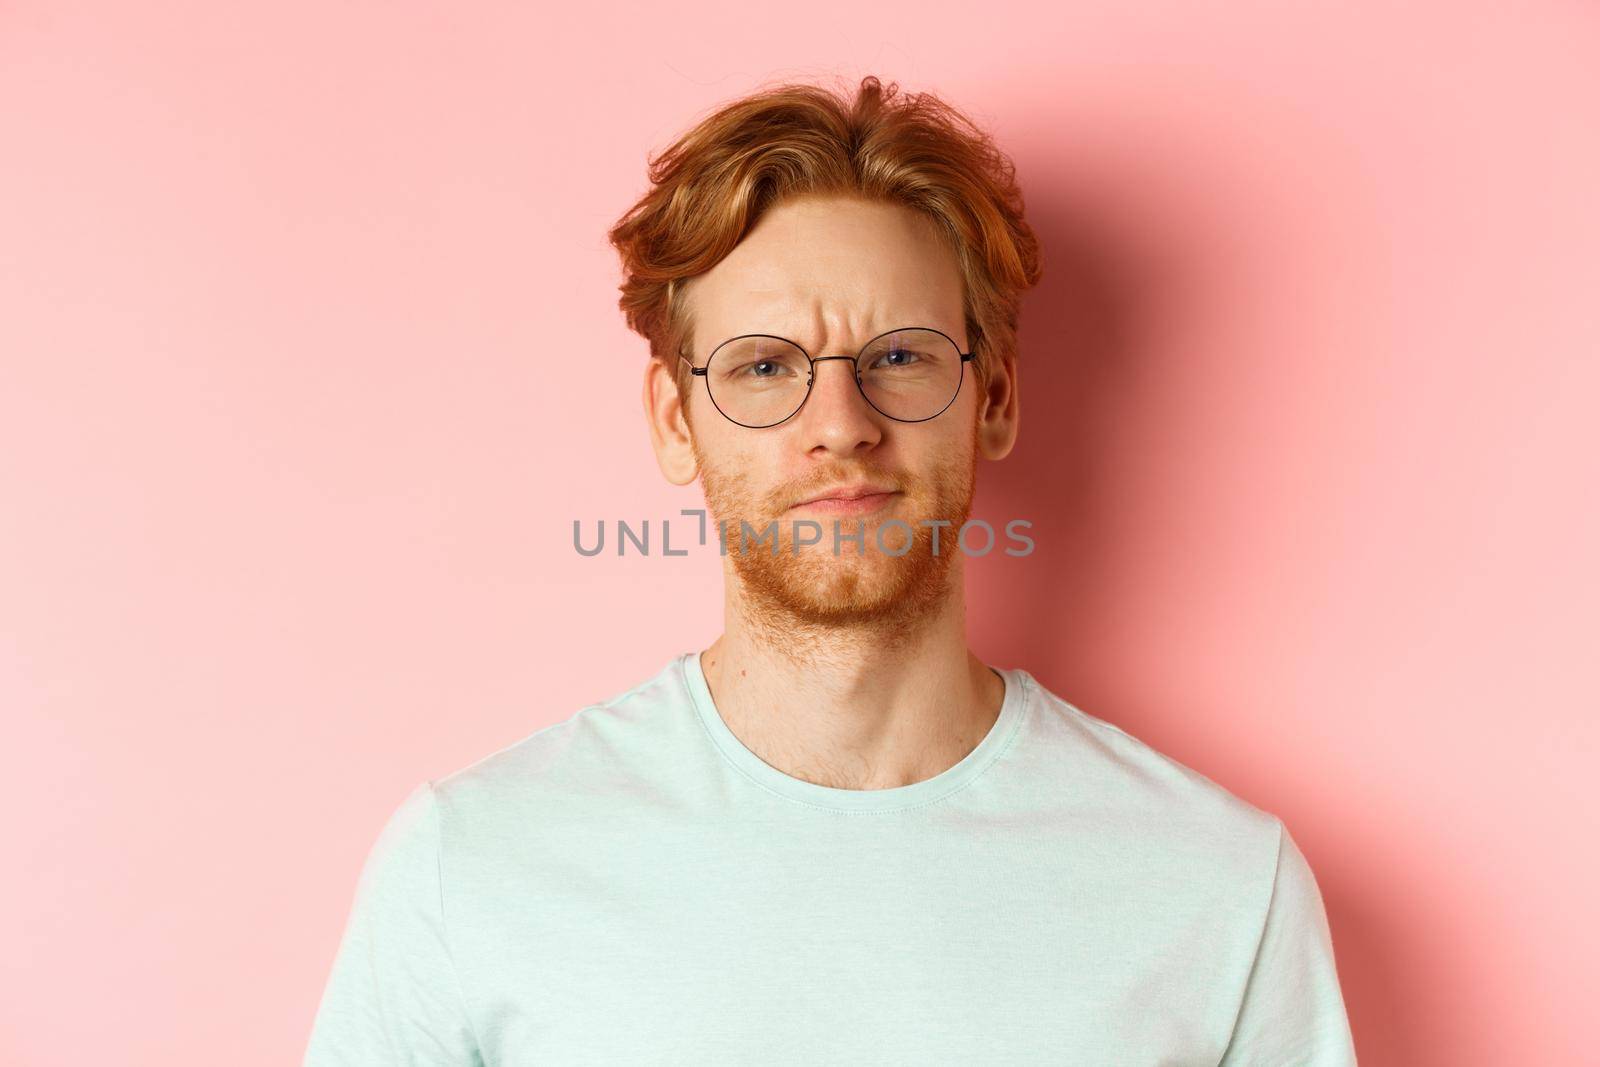 Headshot of skeptical redhead man in glasses and t-shirt frowning disappointed, staring with disapproval and judgement, standing over pink background.